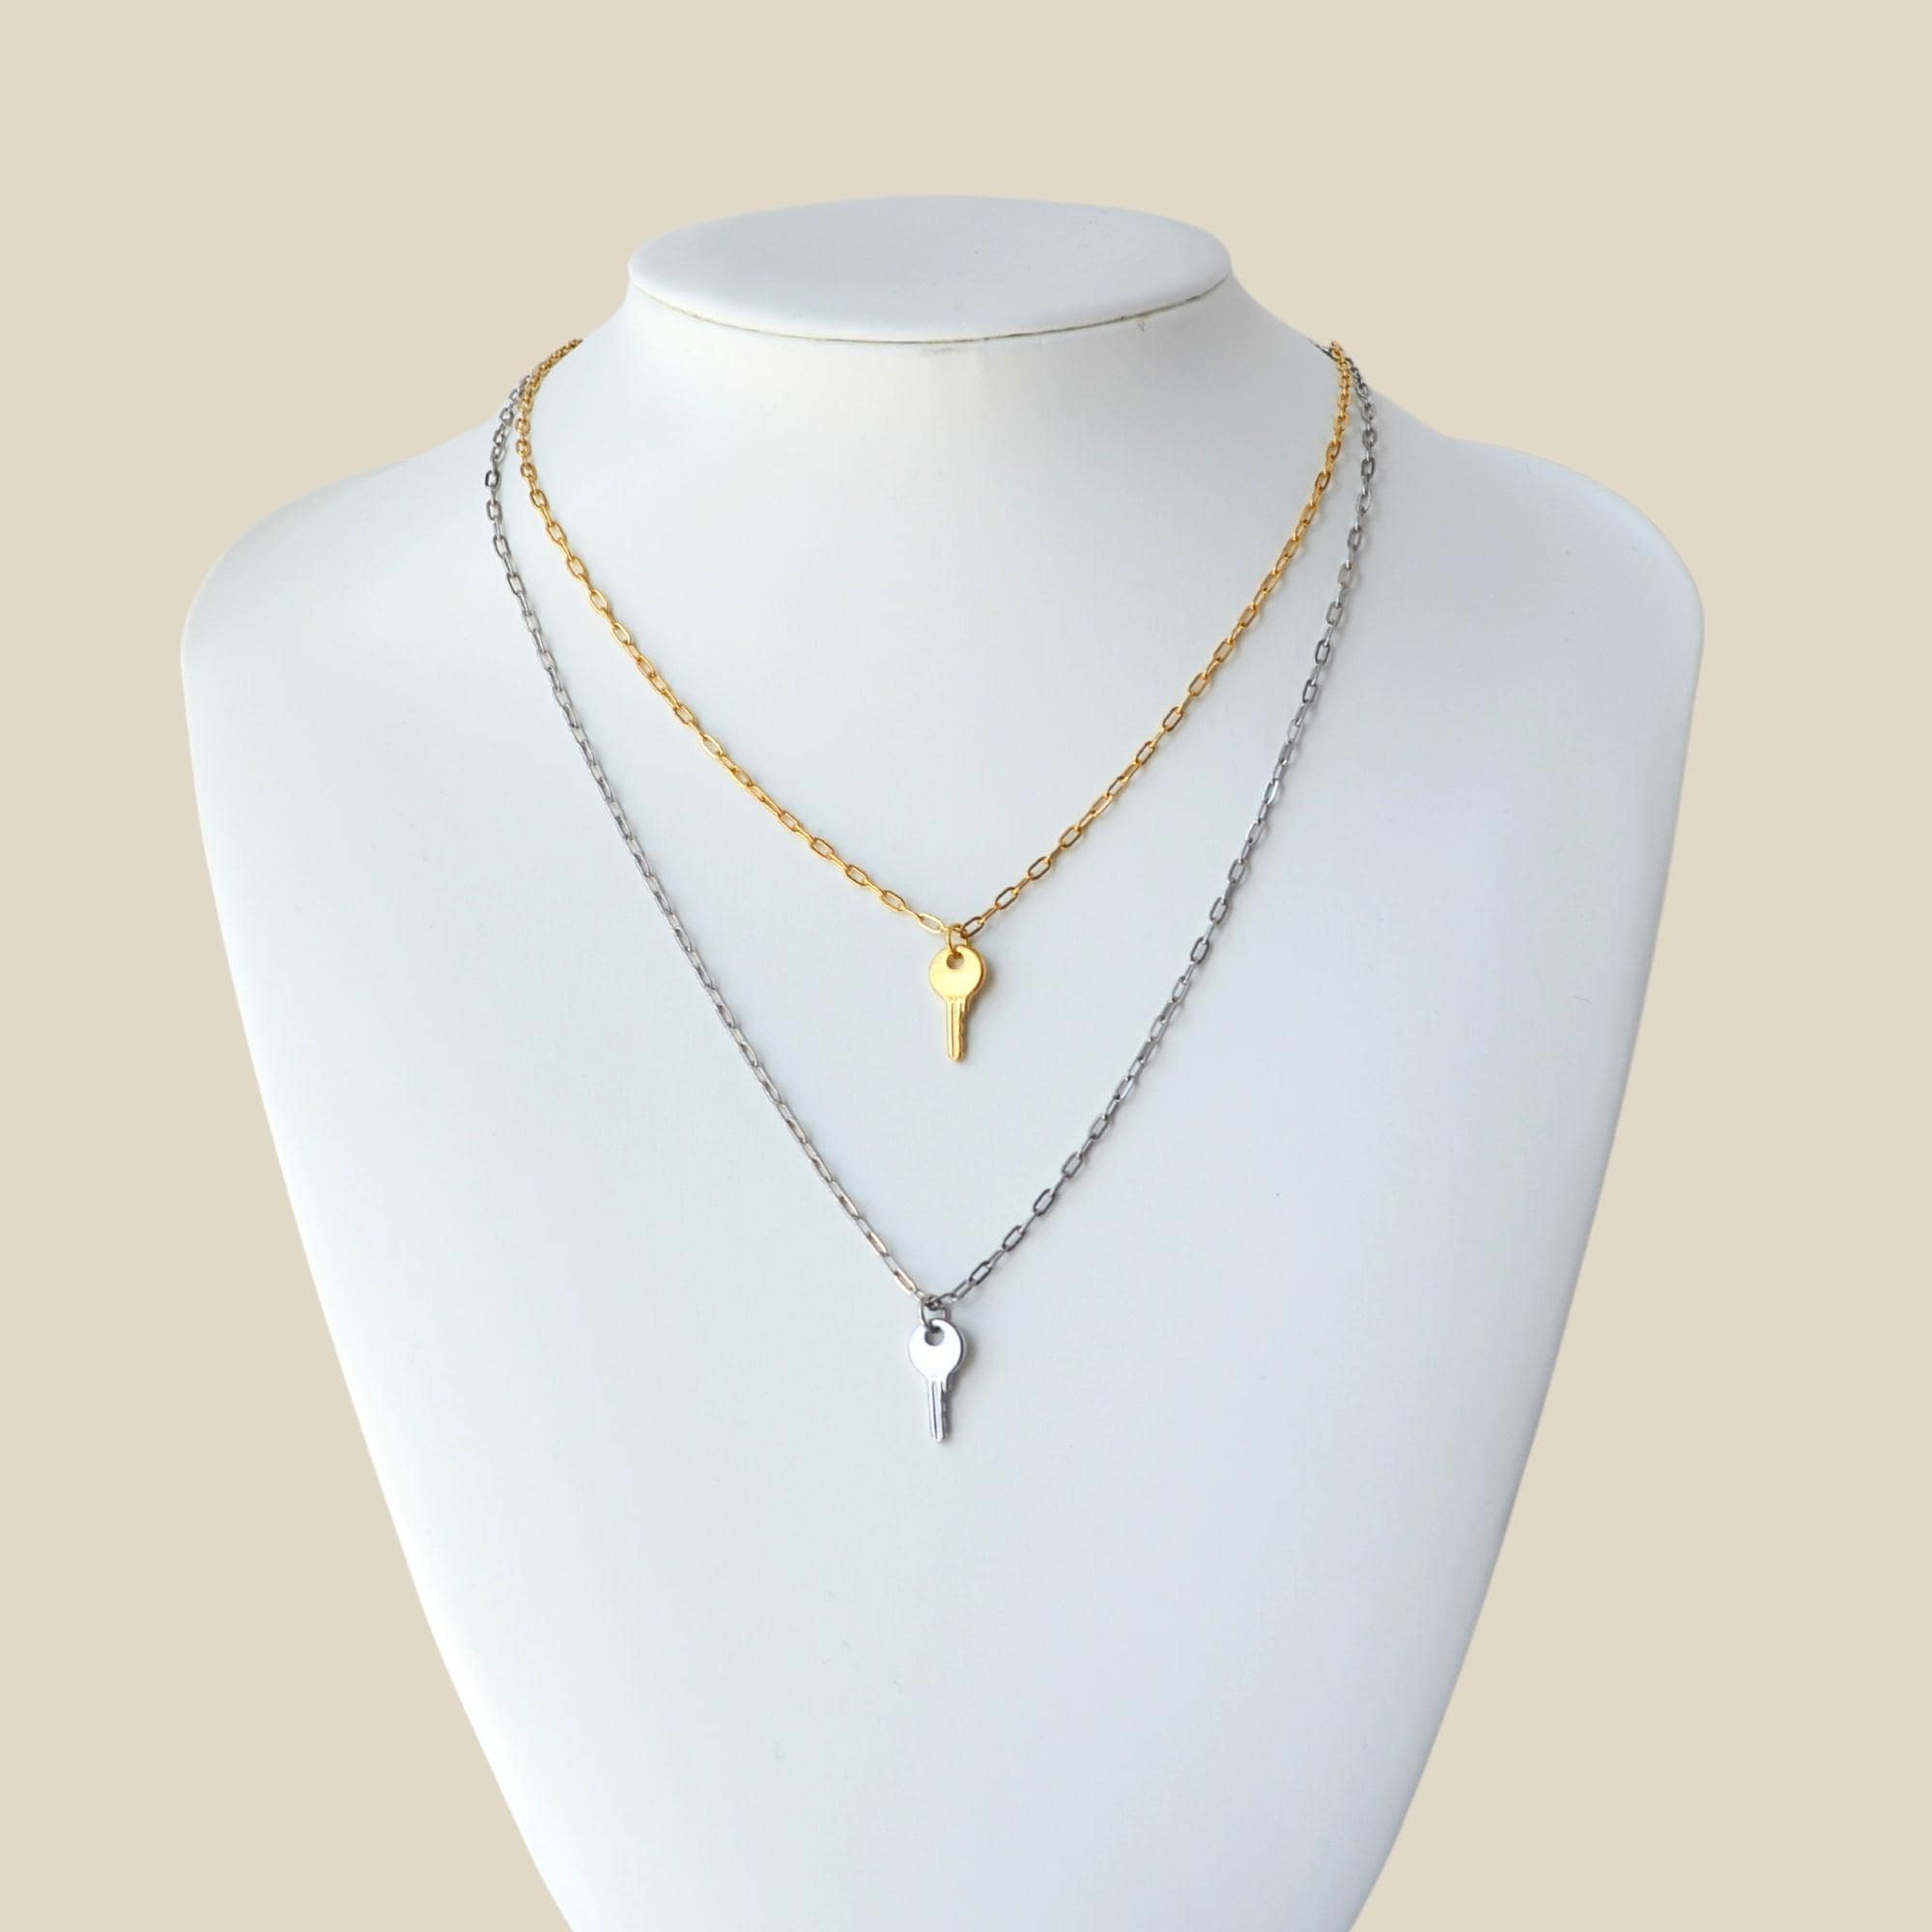 Bevilles 45cm Fancy Small Key Necklace with Cubic Zirconia in Sterling  Silver | M.catch.com.au